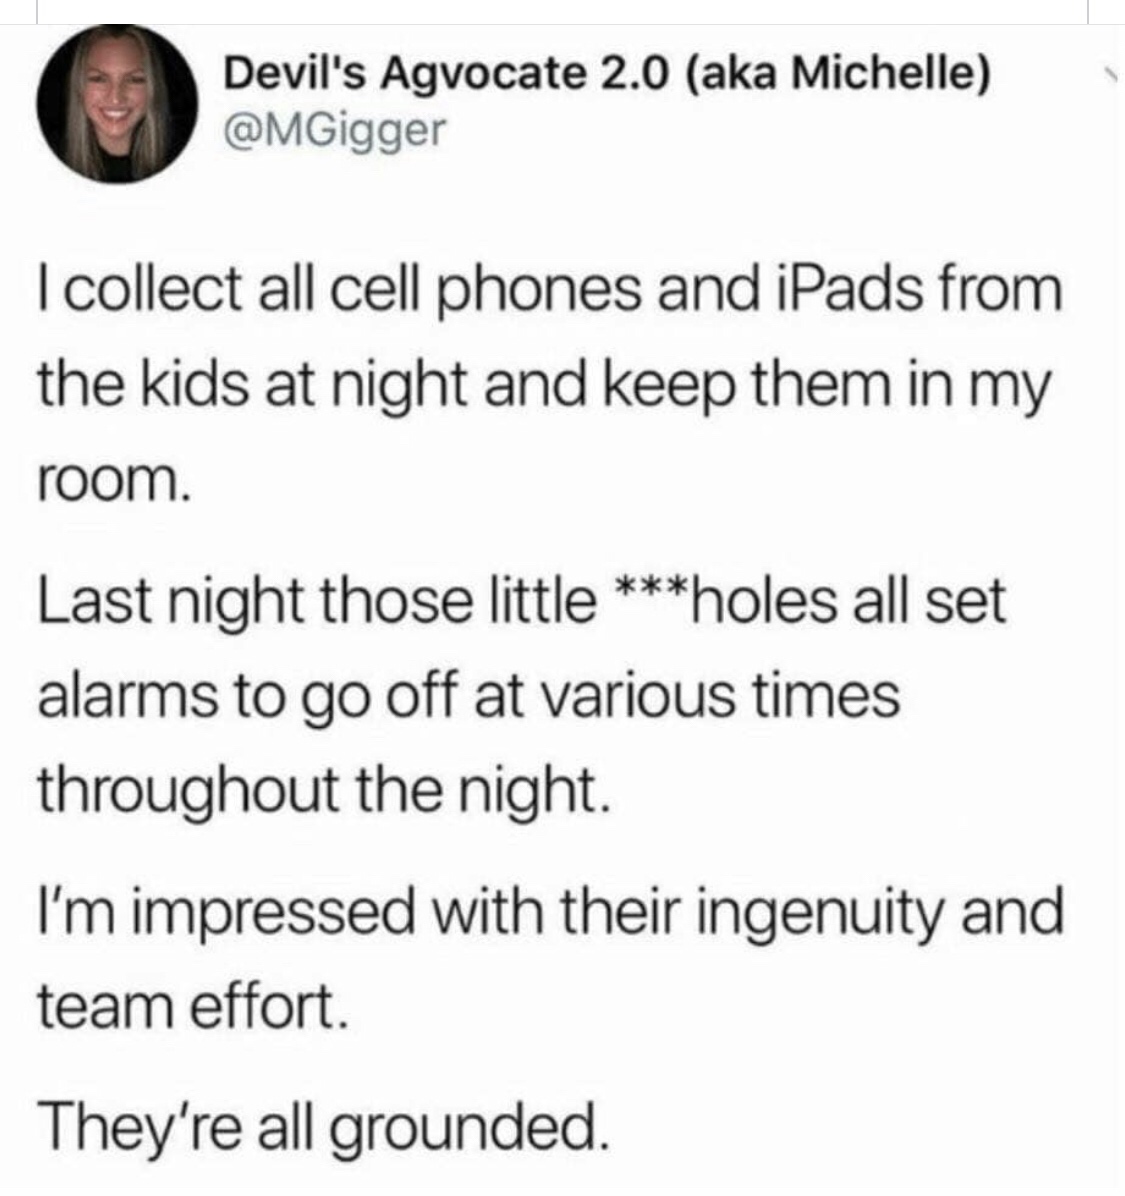 memes - document - Devil's Agvocate 2.0 aka Michelle I collect all cell phones and iPads from the kids at night and keep them in my room. Last night those little holes all set alarms to go off at various times throughout the night. I'm impressed with thei